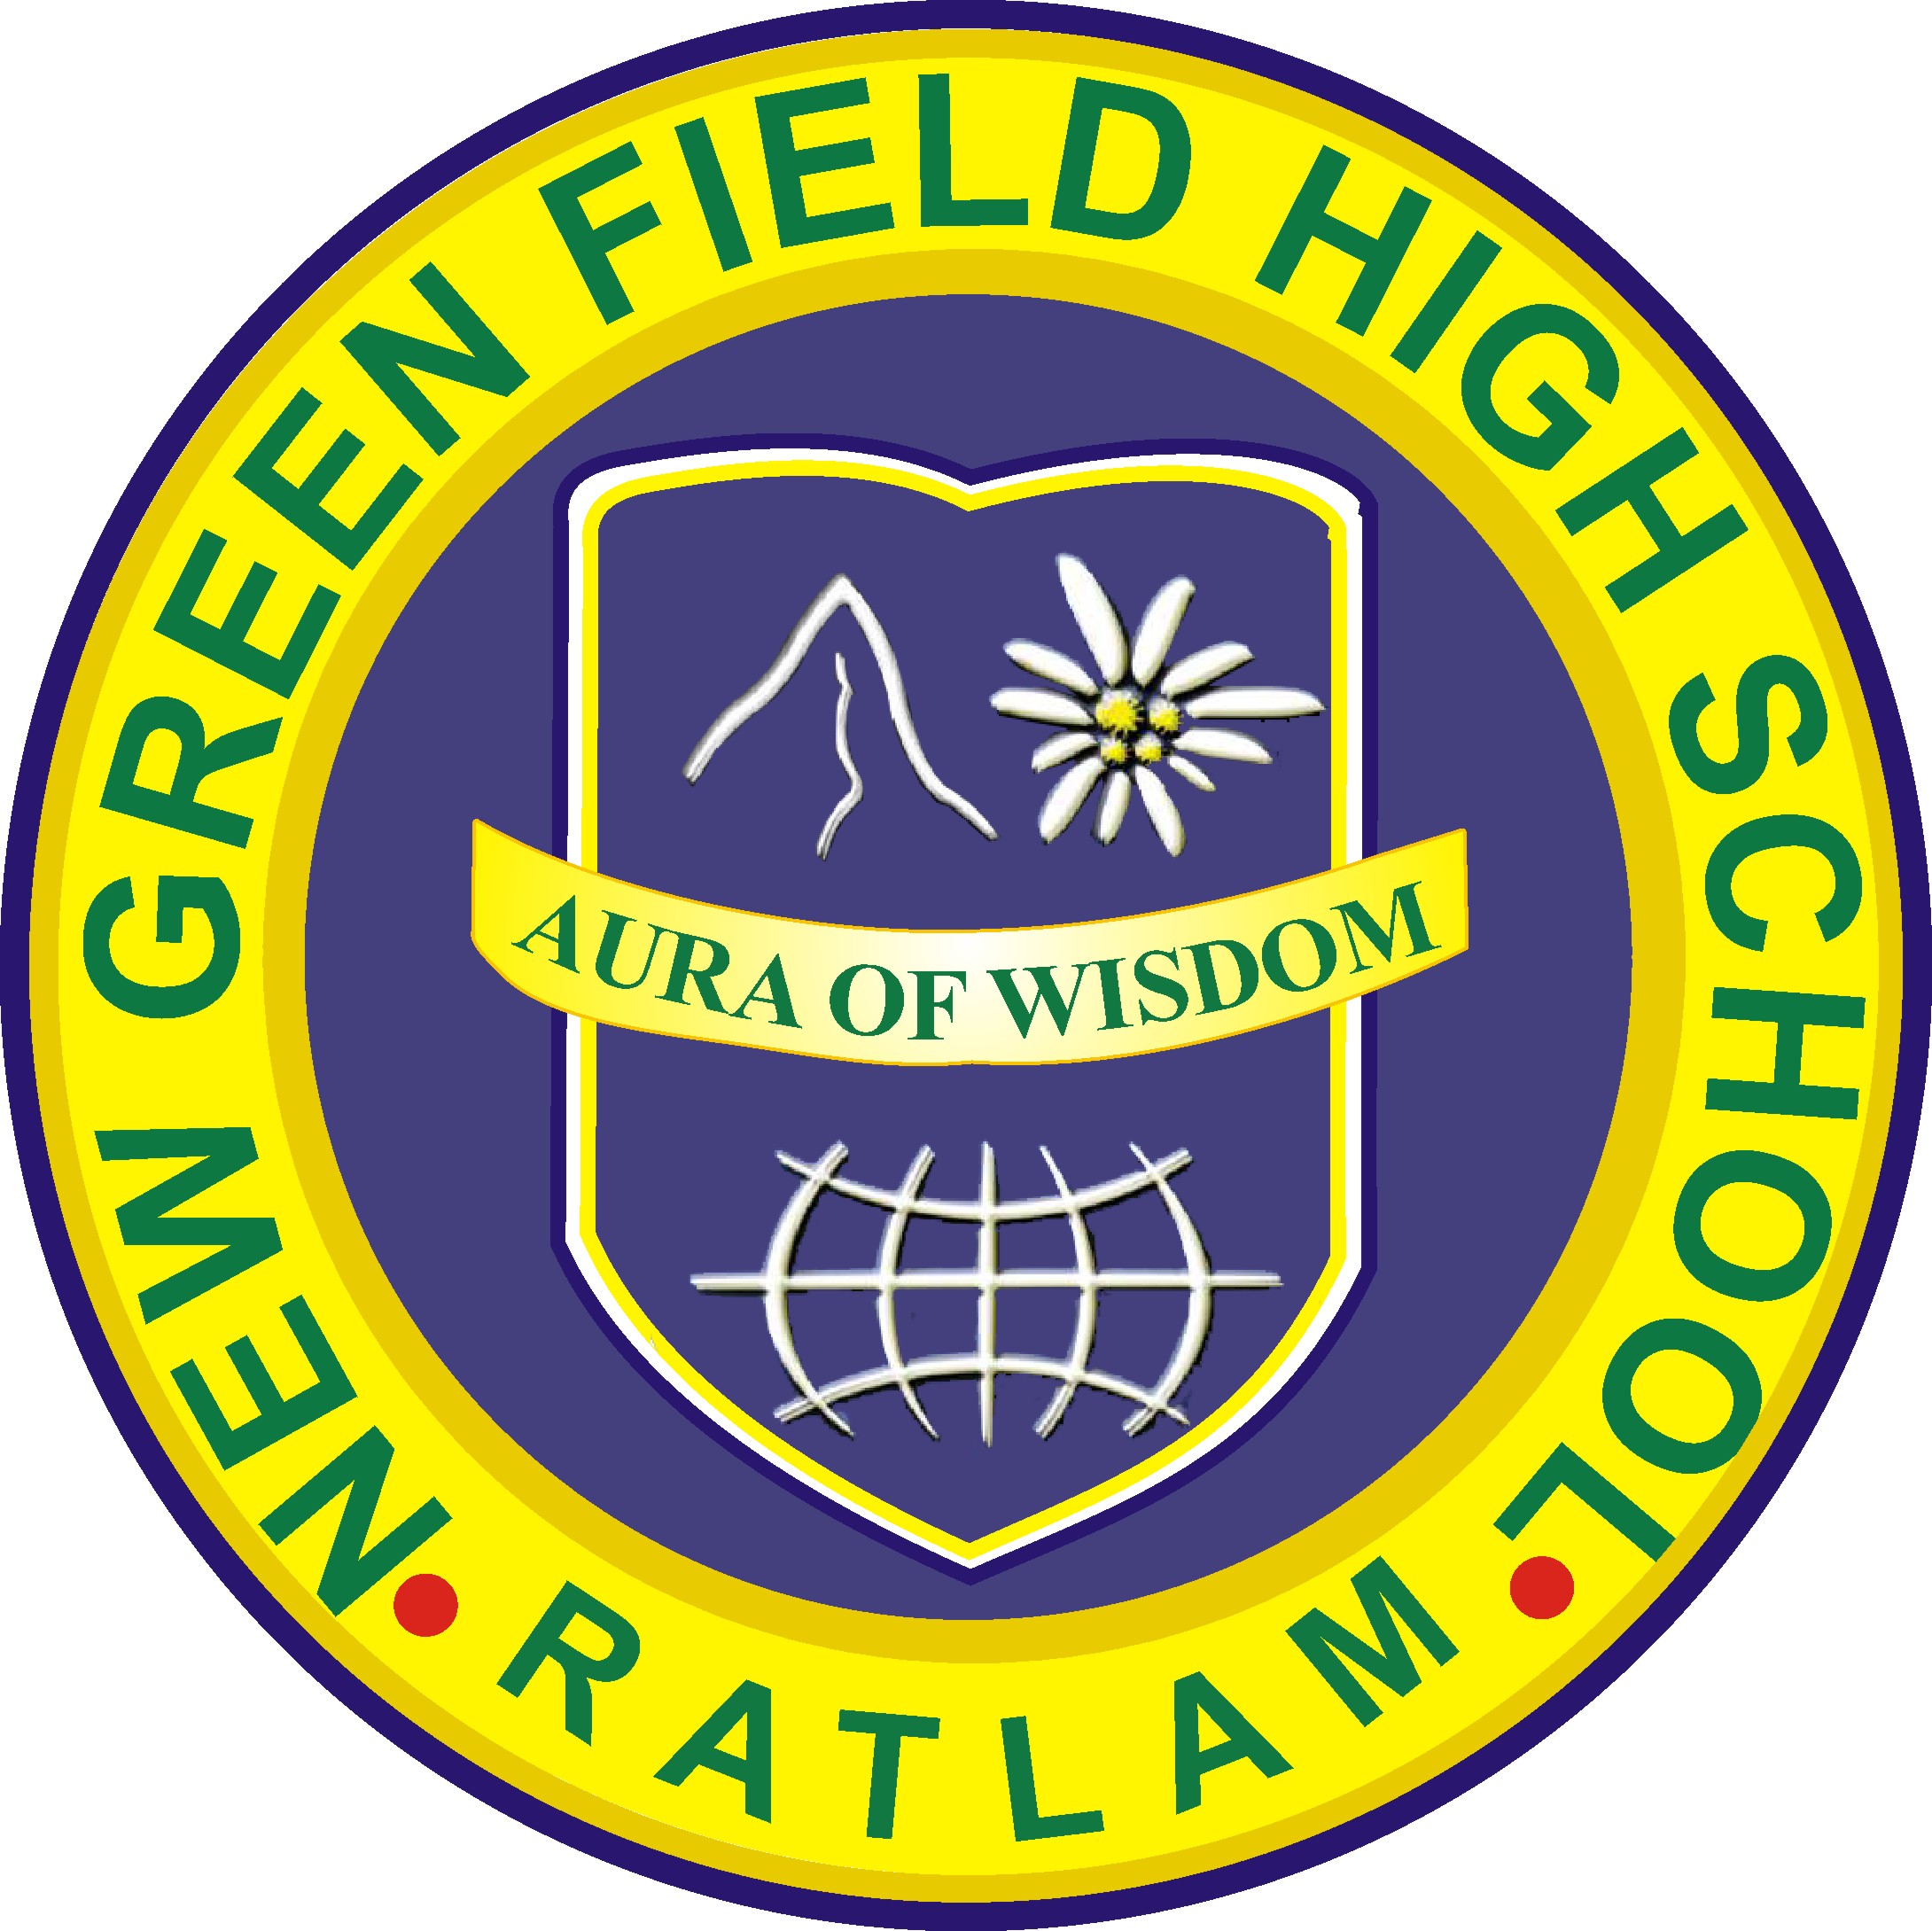 New Green Field High School|Colleges|Education